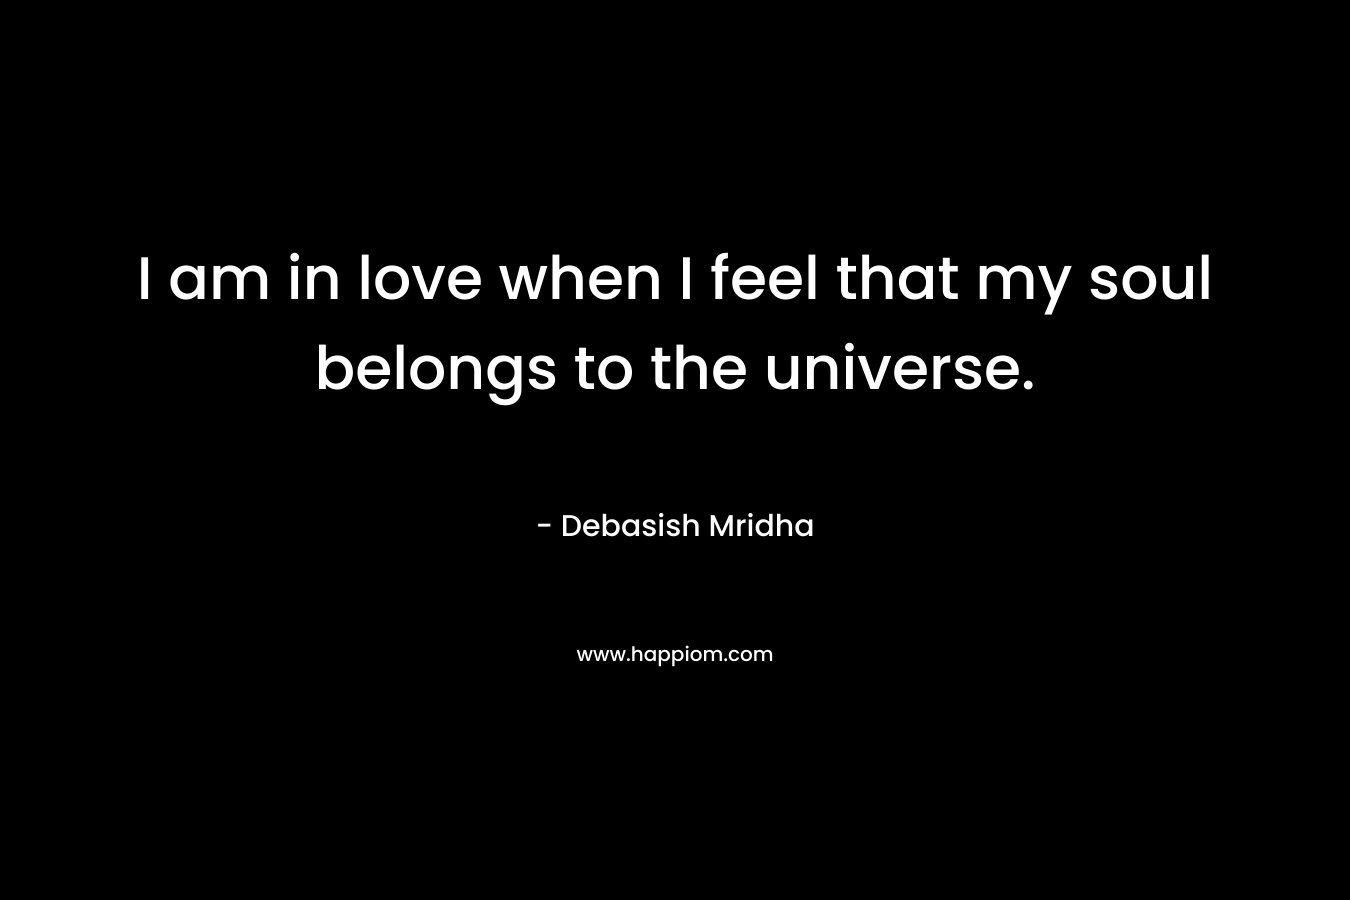 I am in love when I feel that my soul belongs to the universe.